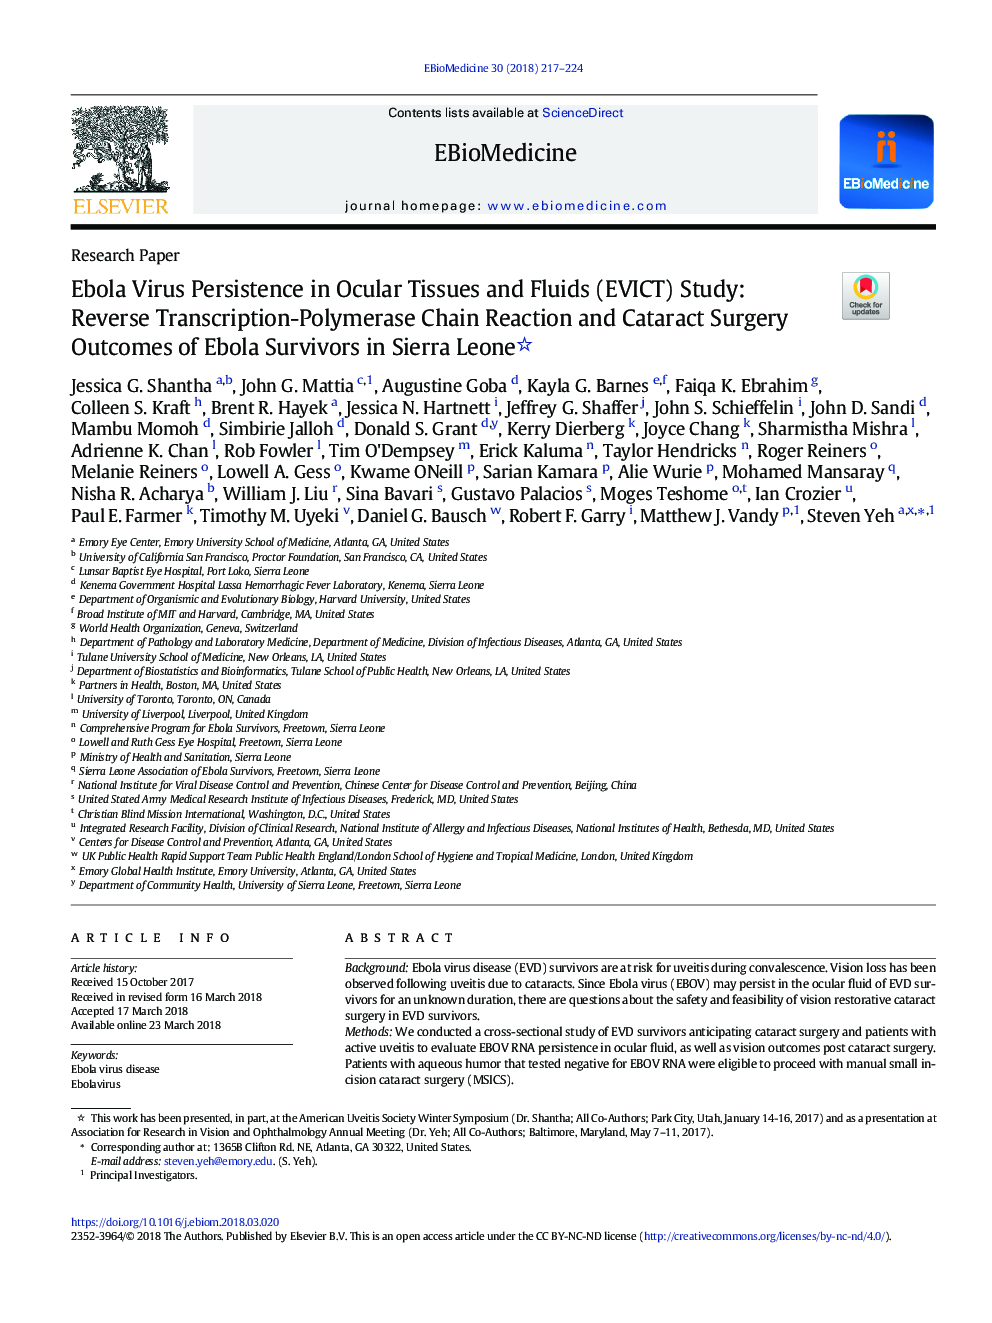 Ebola Virus Persistence in Ocular Tissues and Fluids (EVICT) Study: Reverse Transcription-Polymerase Chain Reaction and Cataract Surgery Outcomes of Ebola Survivors in Sierra Leone